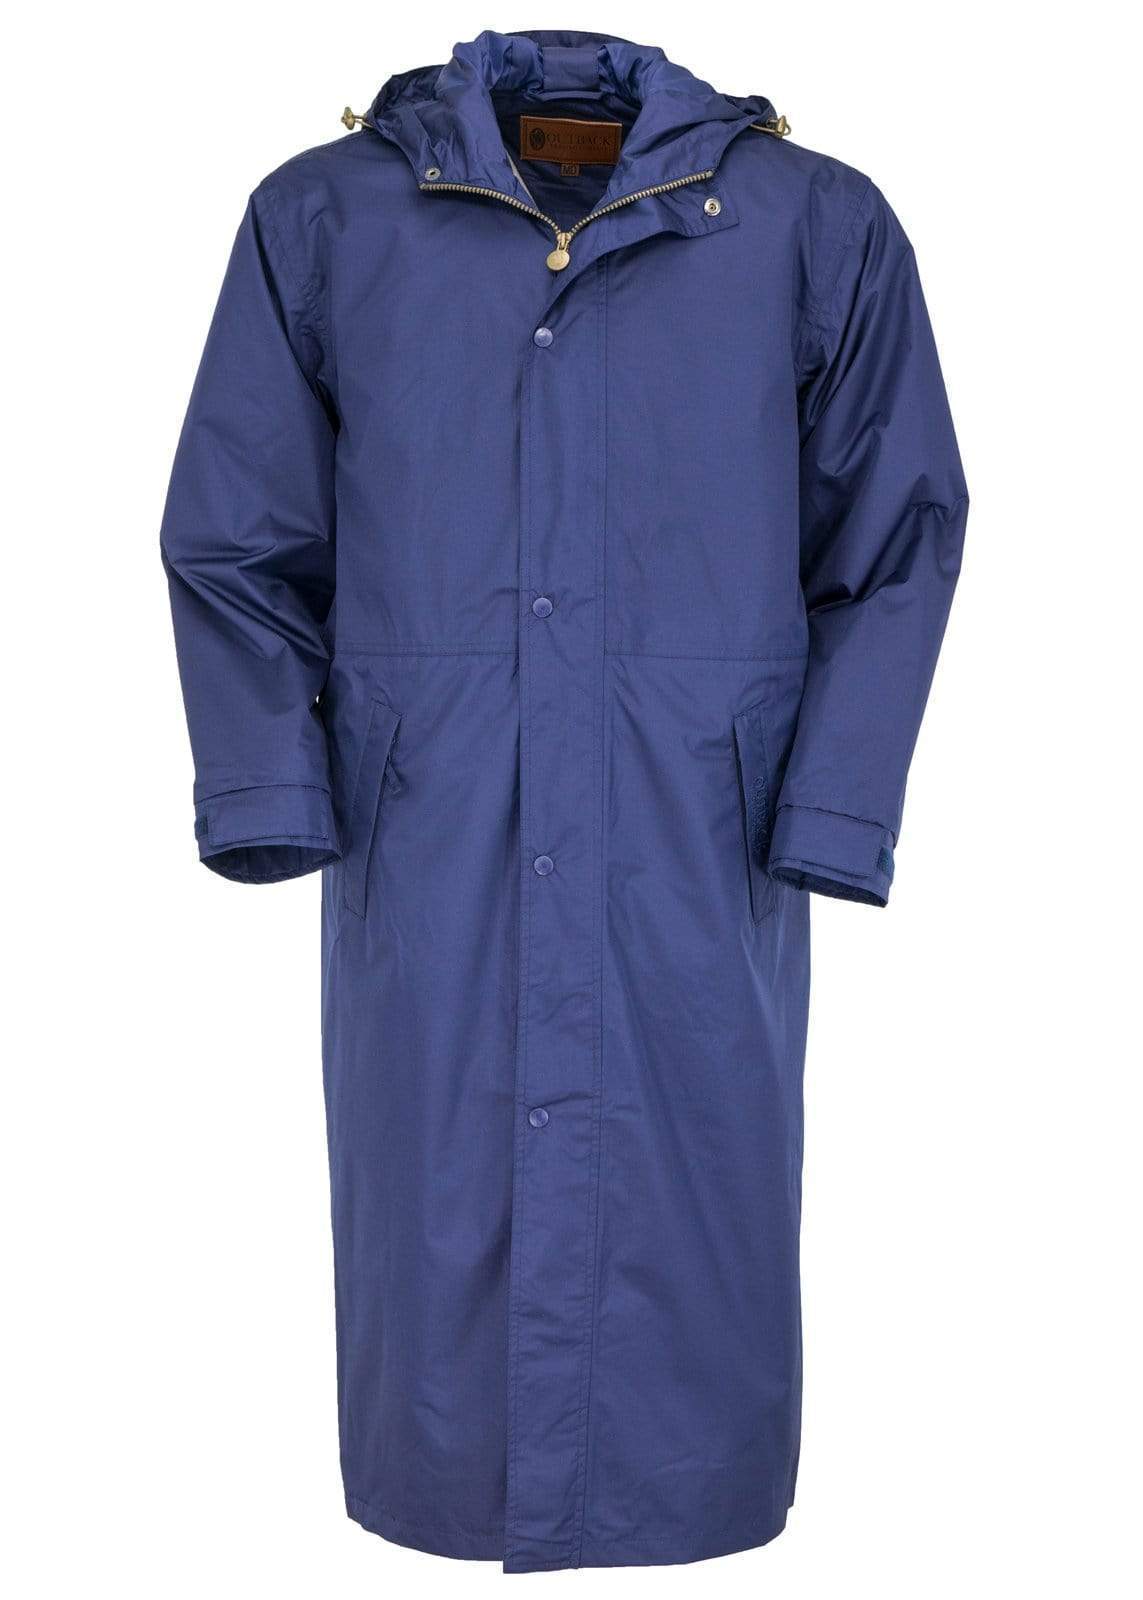 https://cdn.shopify.com/s/files/1/2974/1542/products/outback-trading-company-duster-coats-navy-xs-pak-a-roo-duster-2406-nvy-xs-28765812818054.jpg?v=1673452754&width=1143